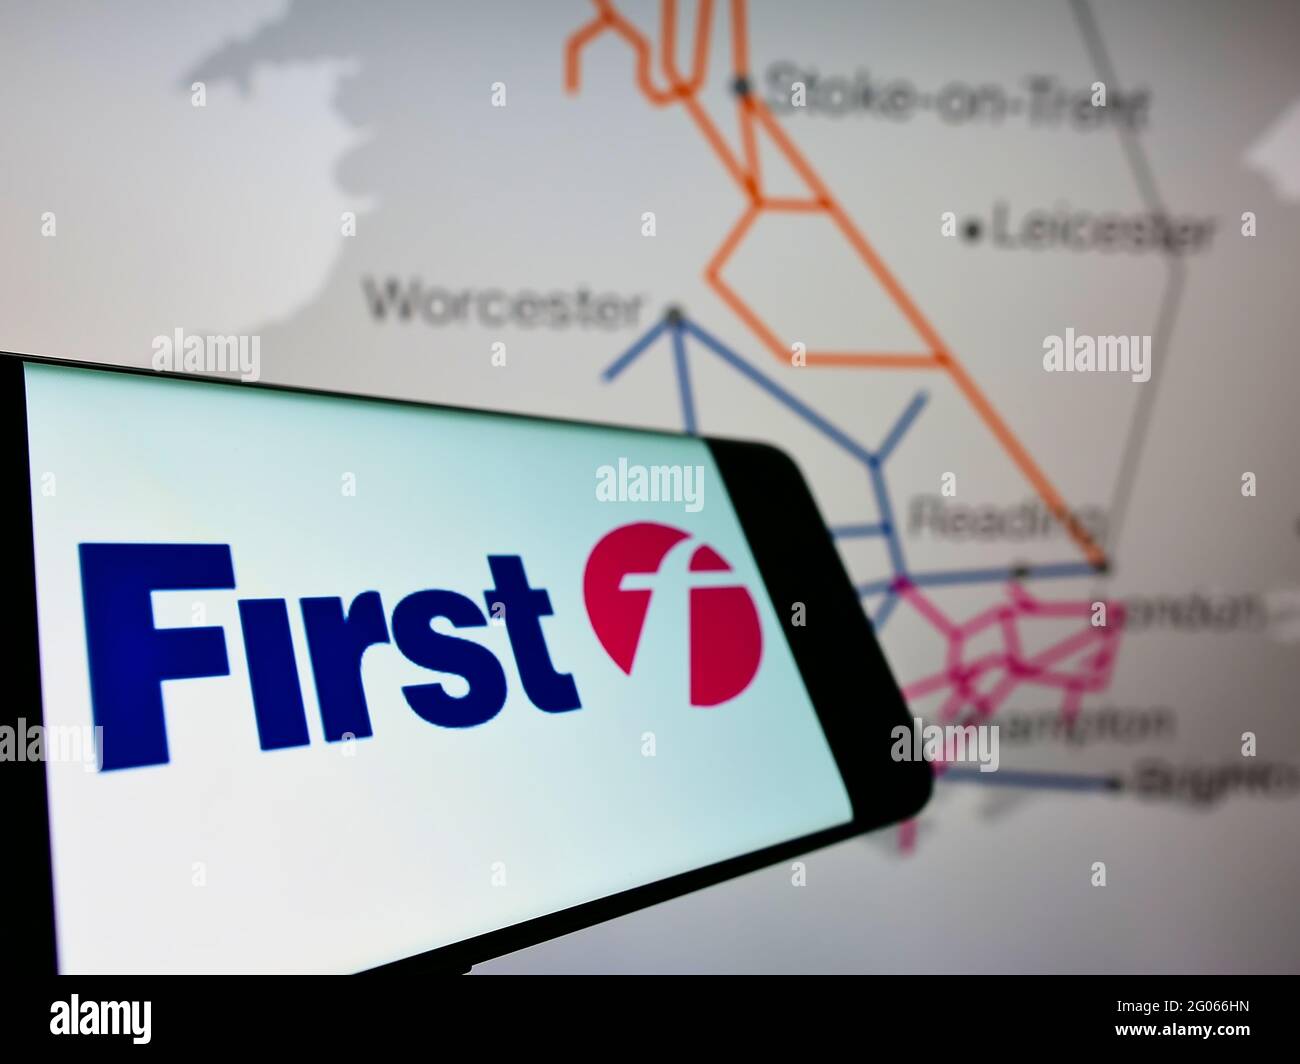 Smartphone with logo of British transport company FirstGroup plc on screen in front of business website. Focus on center-right of phone display. Stock Photo